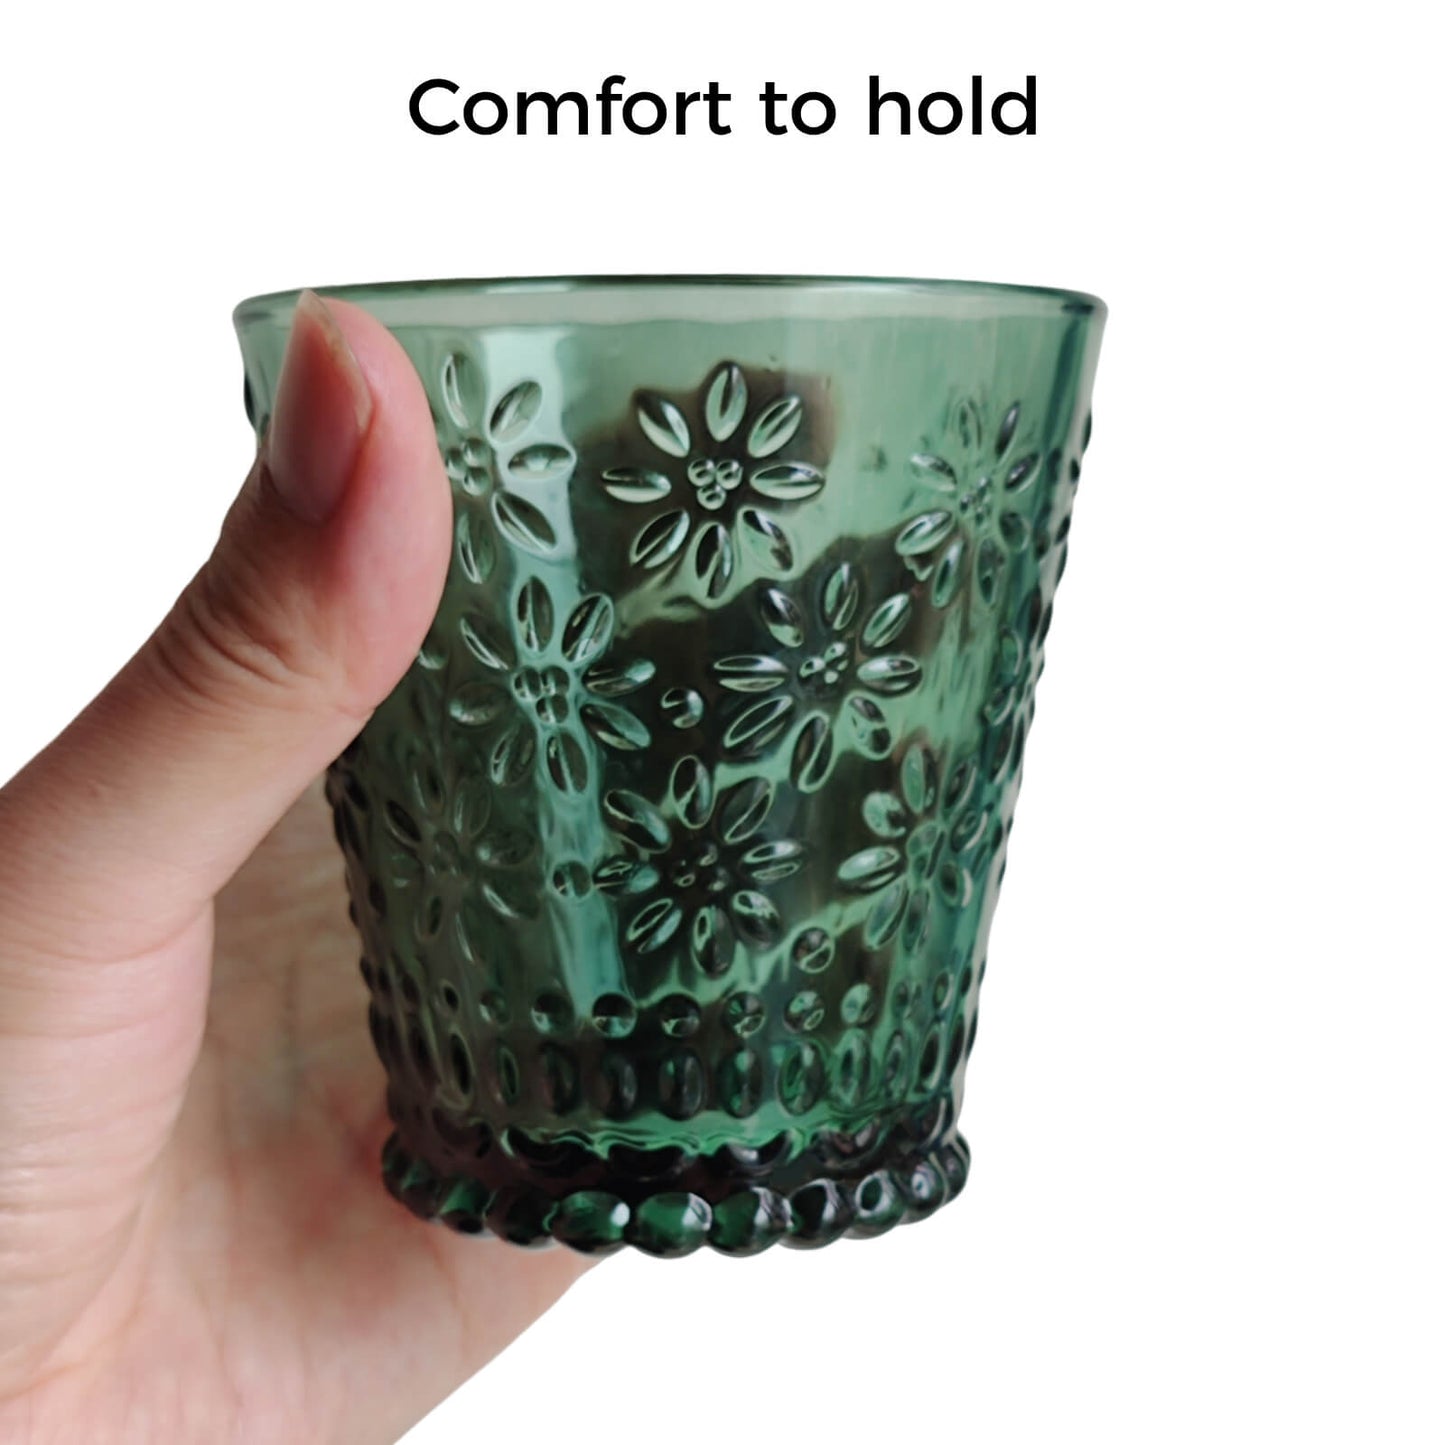 Embossed Glassware - Set of 6 Dishwasher Safe Stackable Glass Cups, Vintage Green Daisy Pattern, Heavy Duty, 7oz Capacity